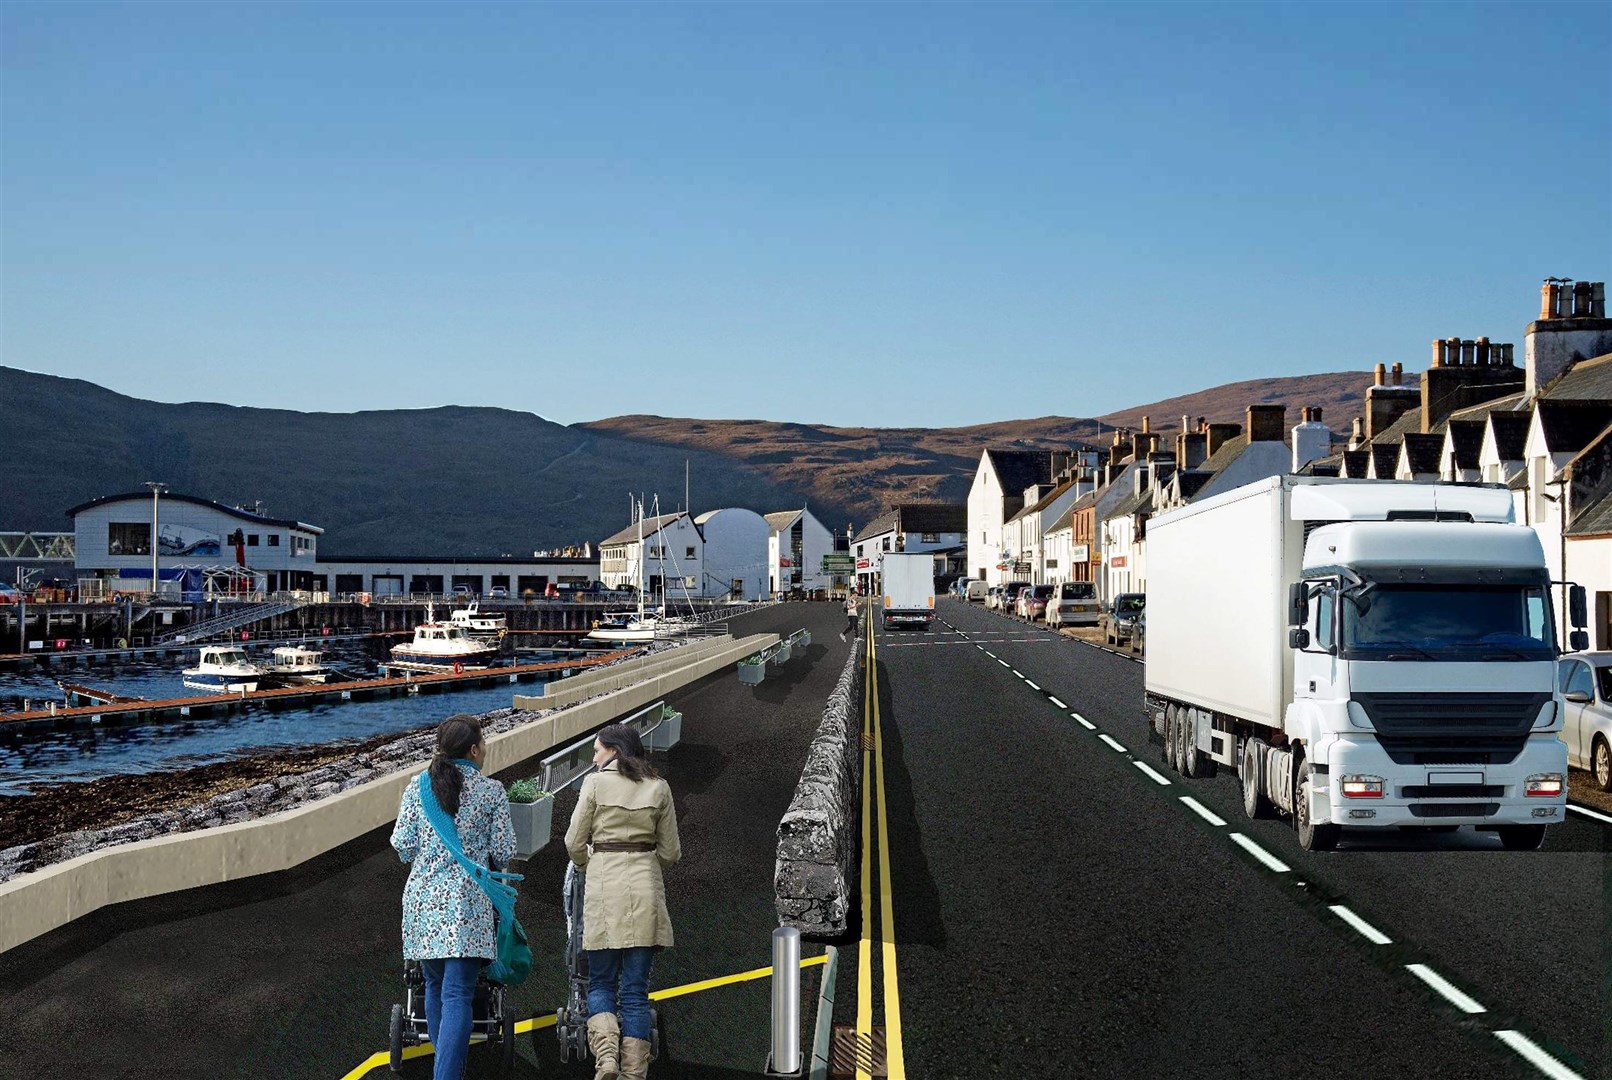 An artist's impression of how the promenade might look.